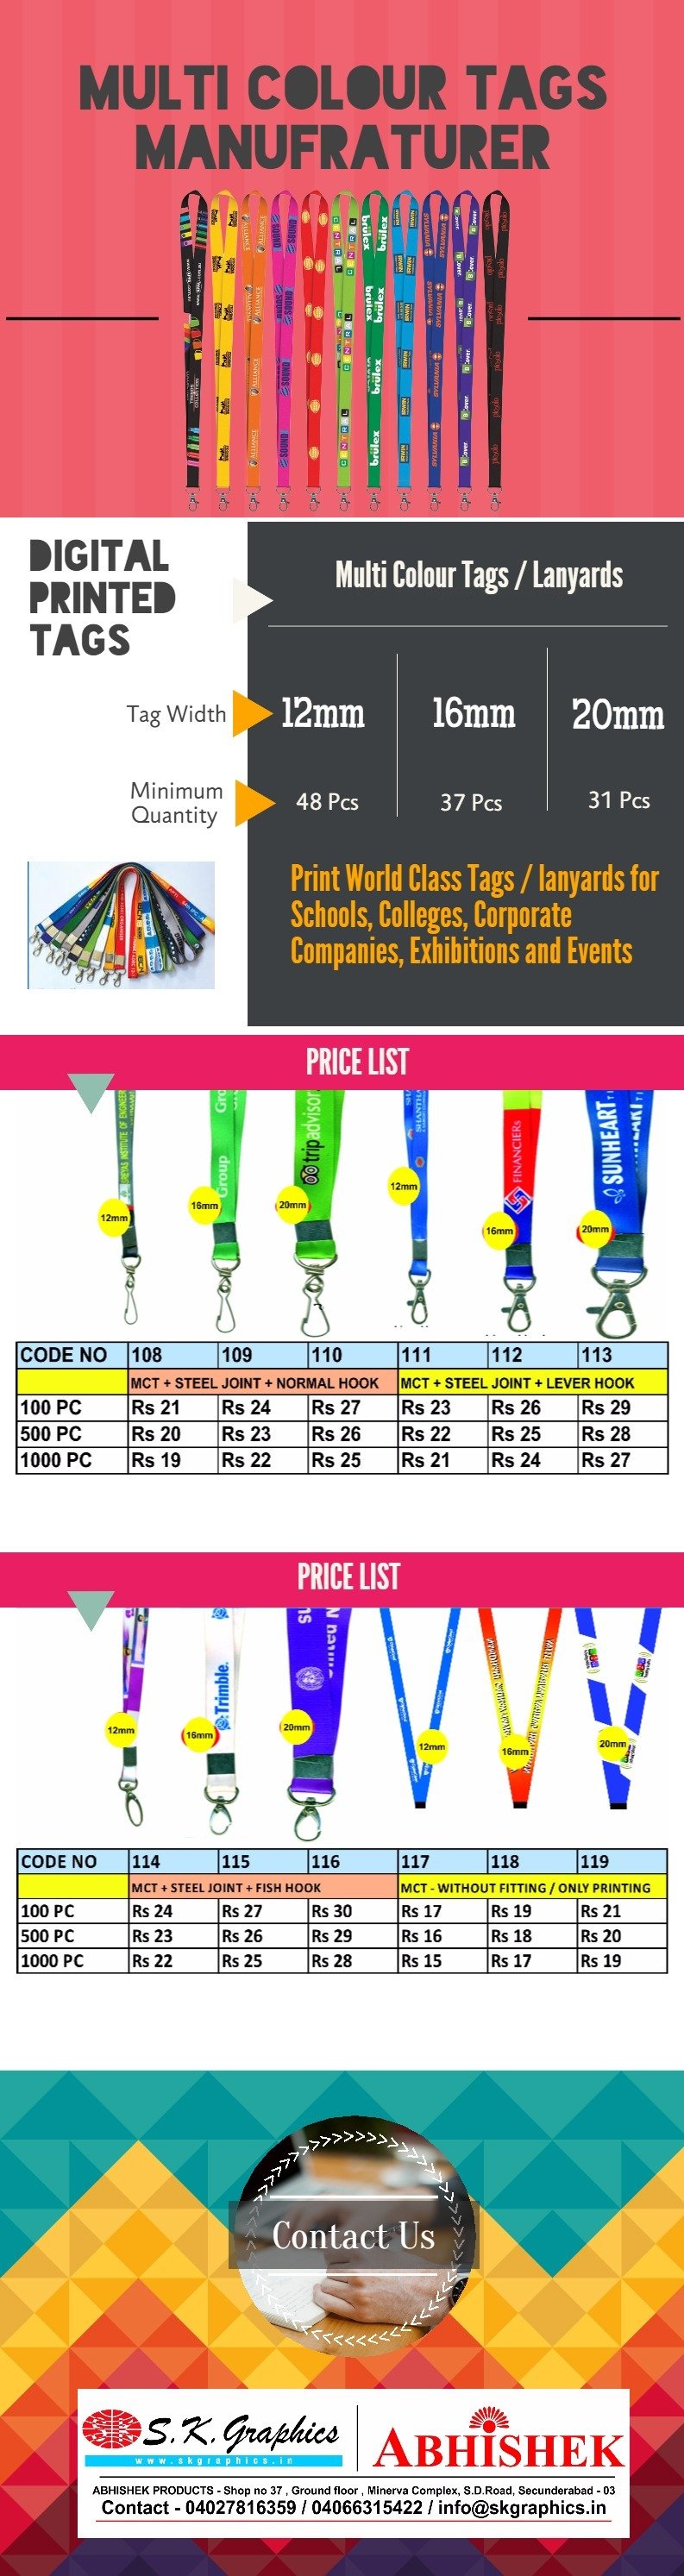 multi colour printed digital tags and lanyard manufacturer